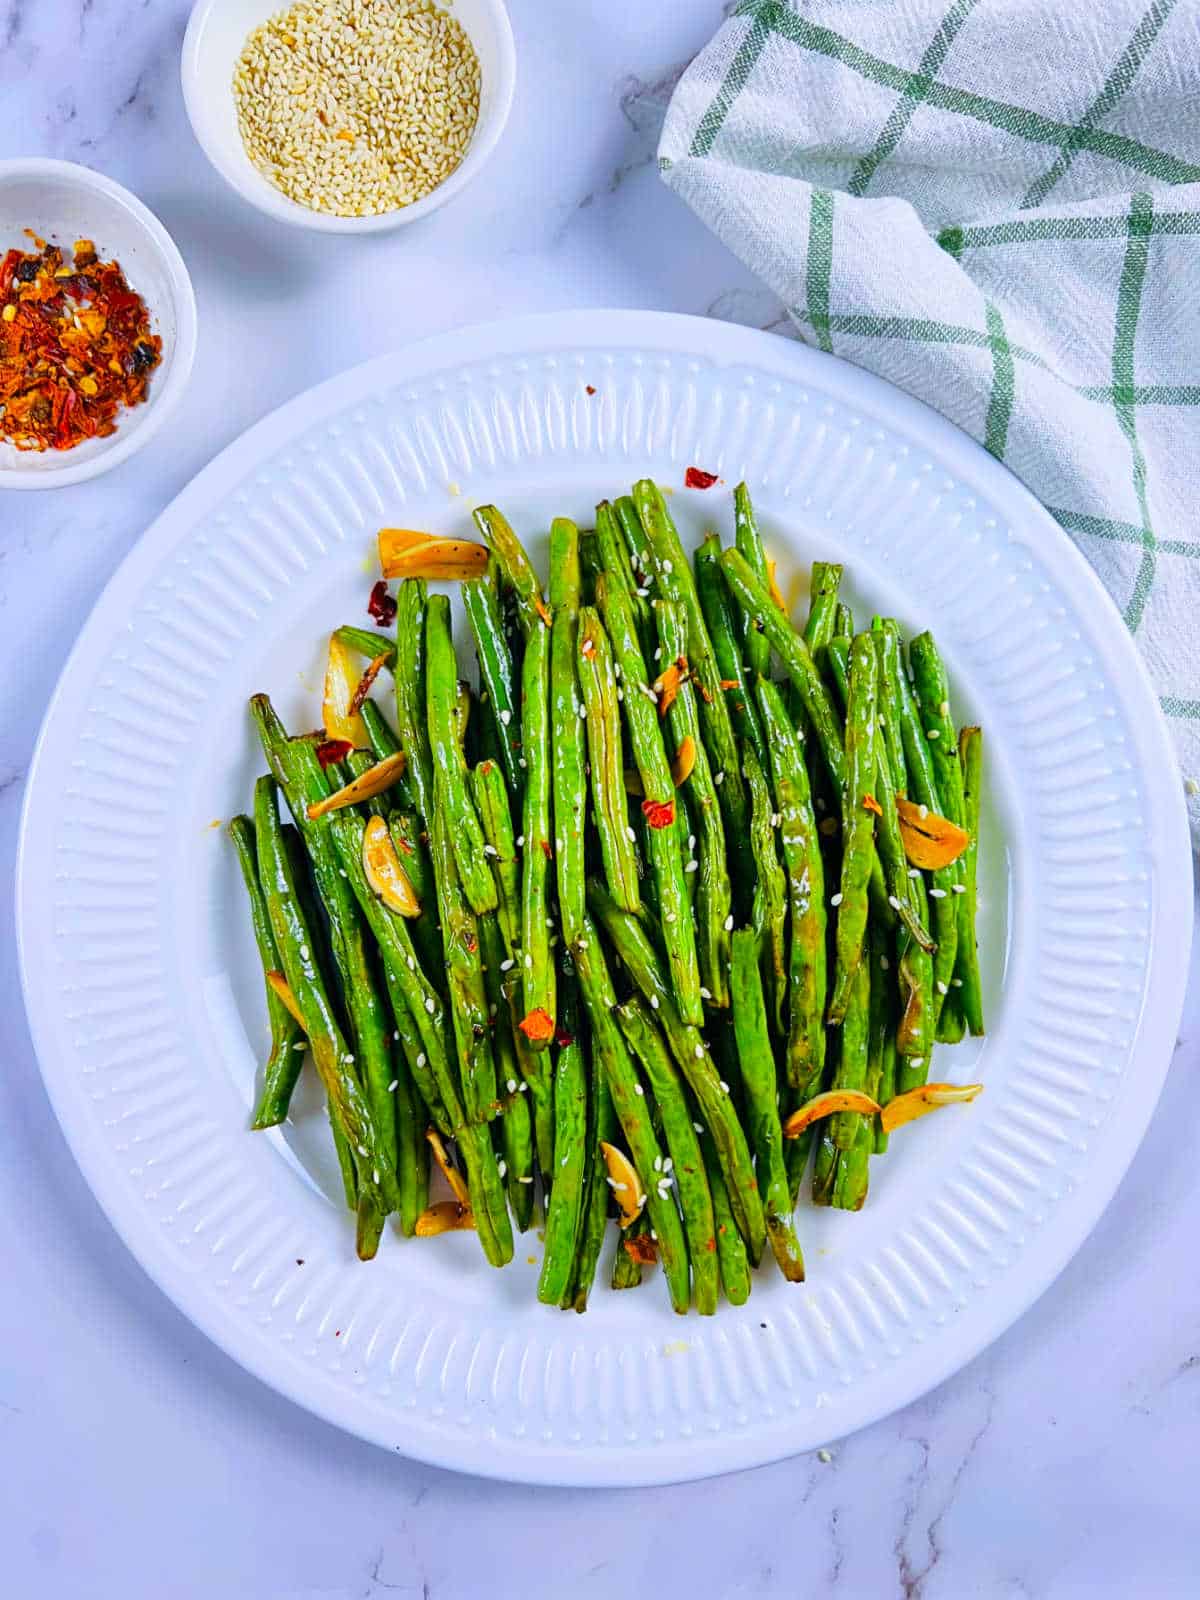 Air fryer green beans placed on a white plate.